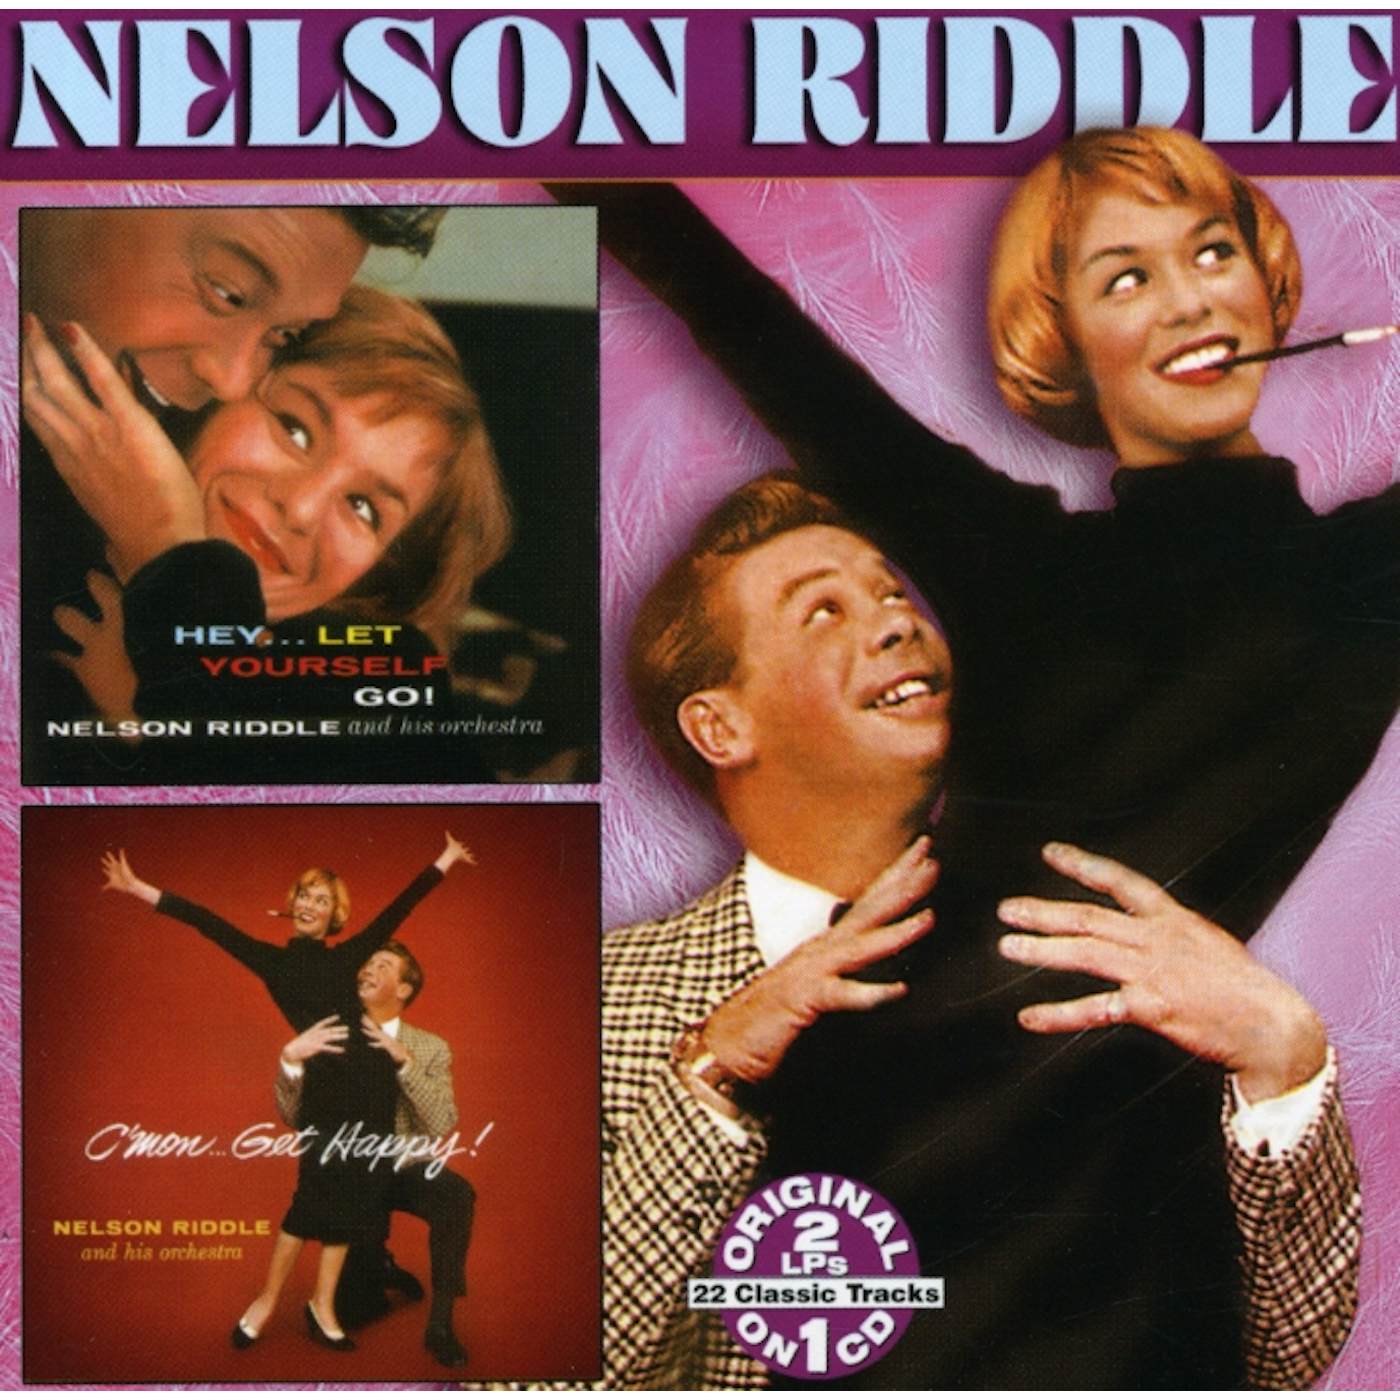 Nelson Riddle HEY LET YOURSELF GO / C MON GET HAPPY CD